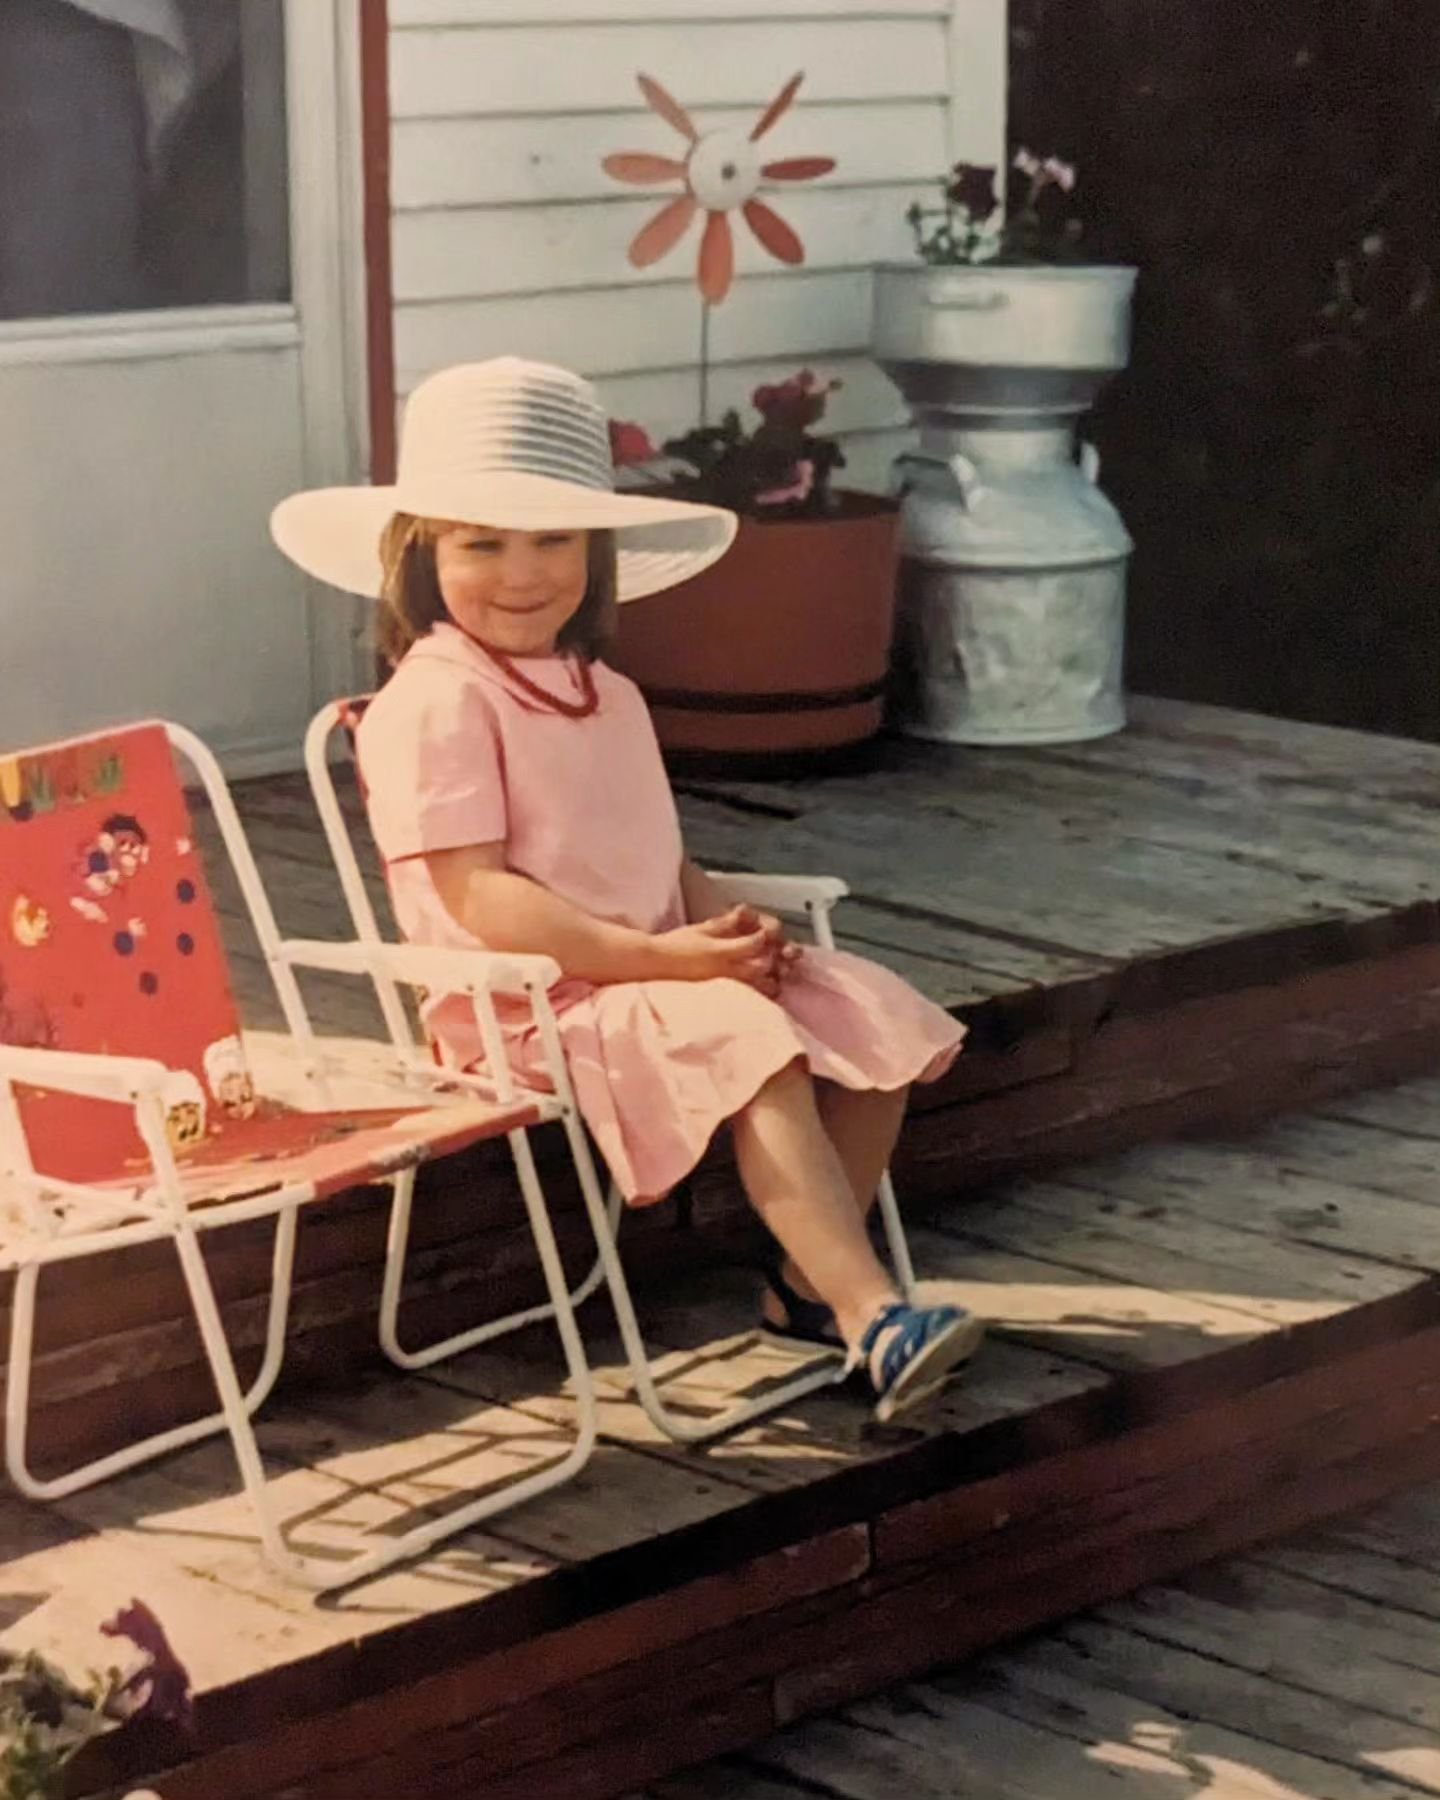 Dear friends...

It's never too late
To recalibrate
Take the balcony view
In whatever's stressing you!

My delighted expression captures a helpful leadership/parenting technique I share in this month's blog post reflecting on two books, Soul of Disci